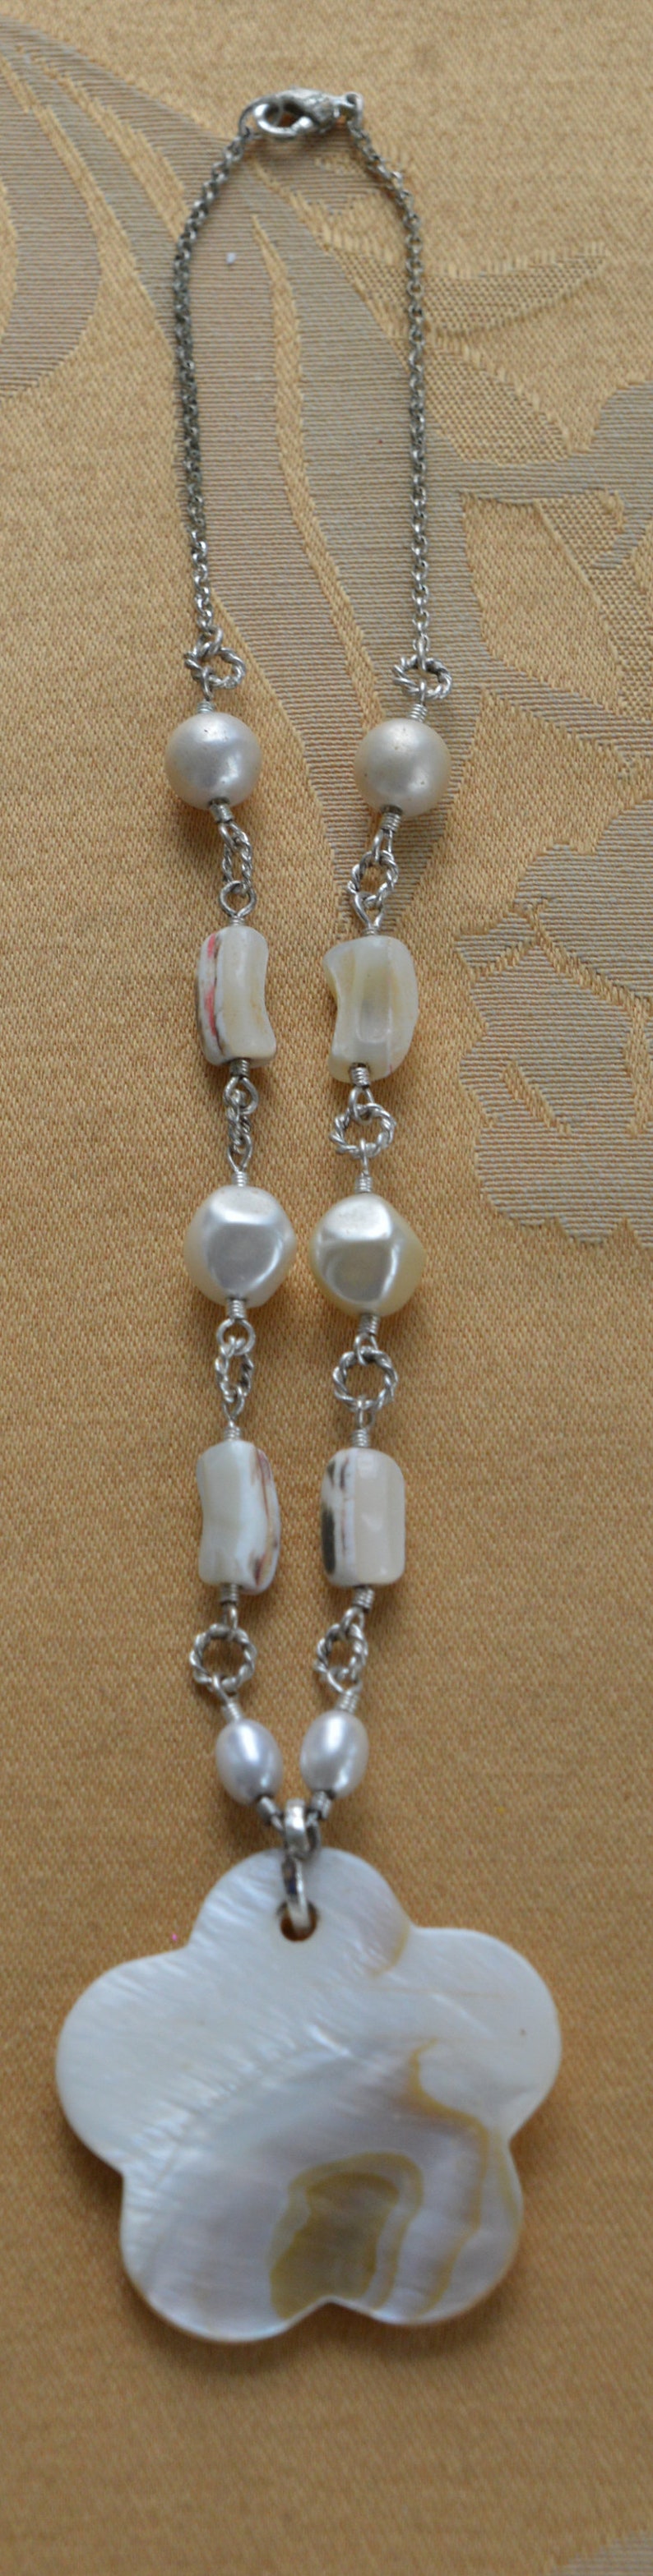 W13 Vintage Faux Pearl Floral Pendant Necklace Silver tone Mother of Pearl